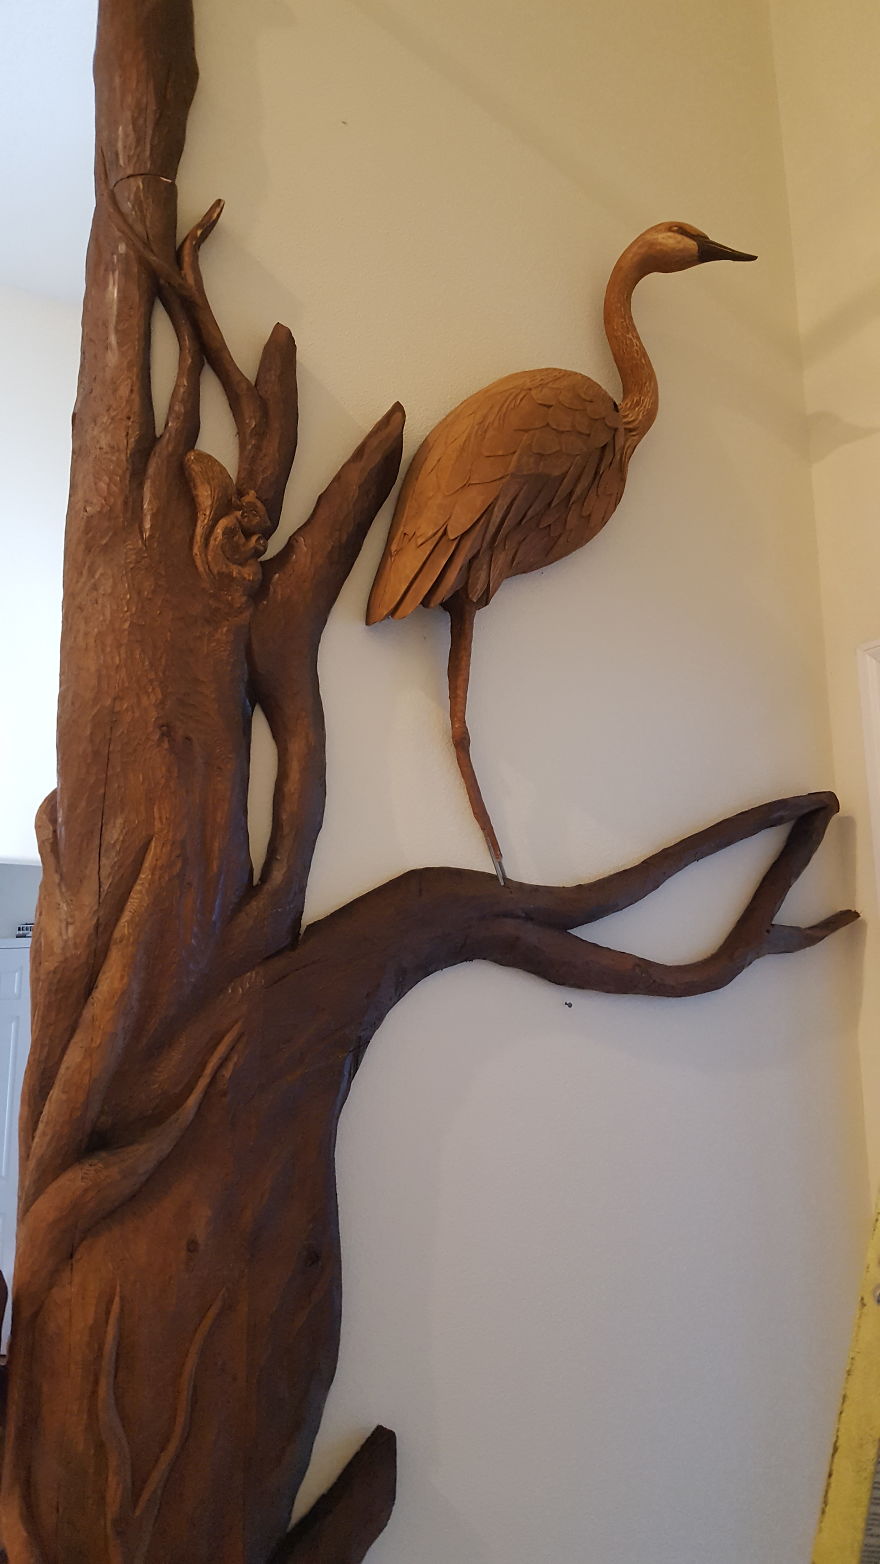 I Hand-Carved This "Nature Tree"